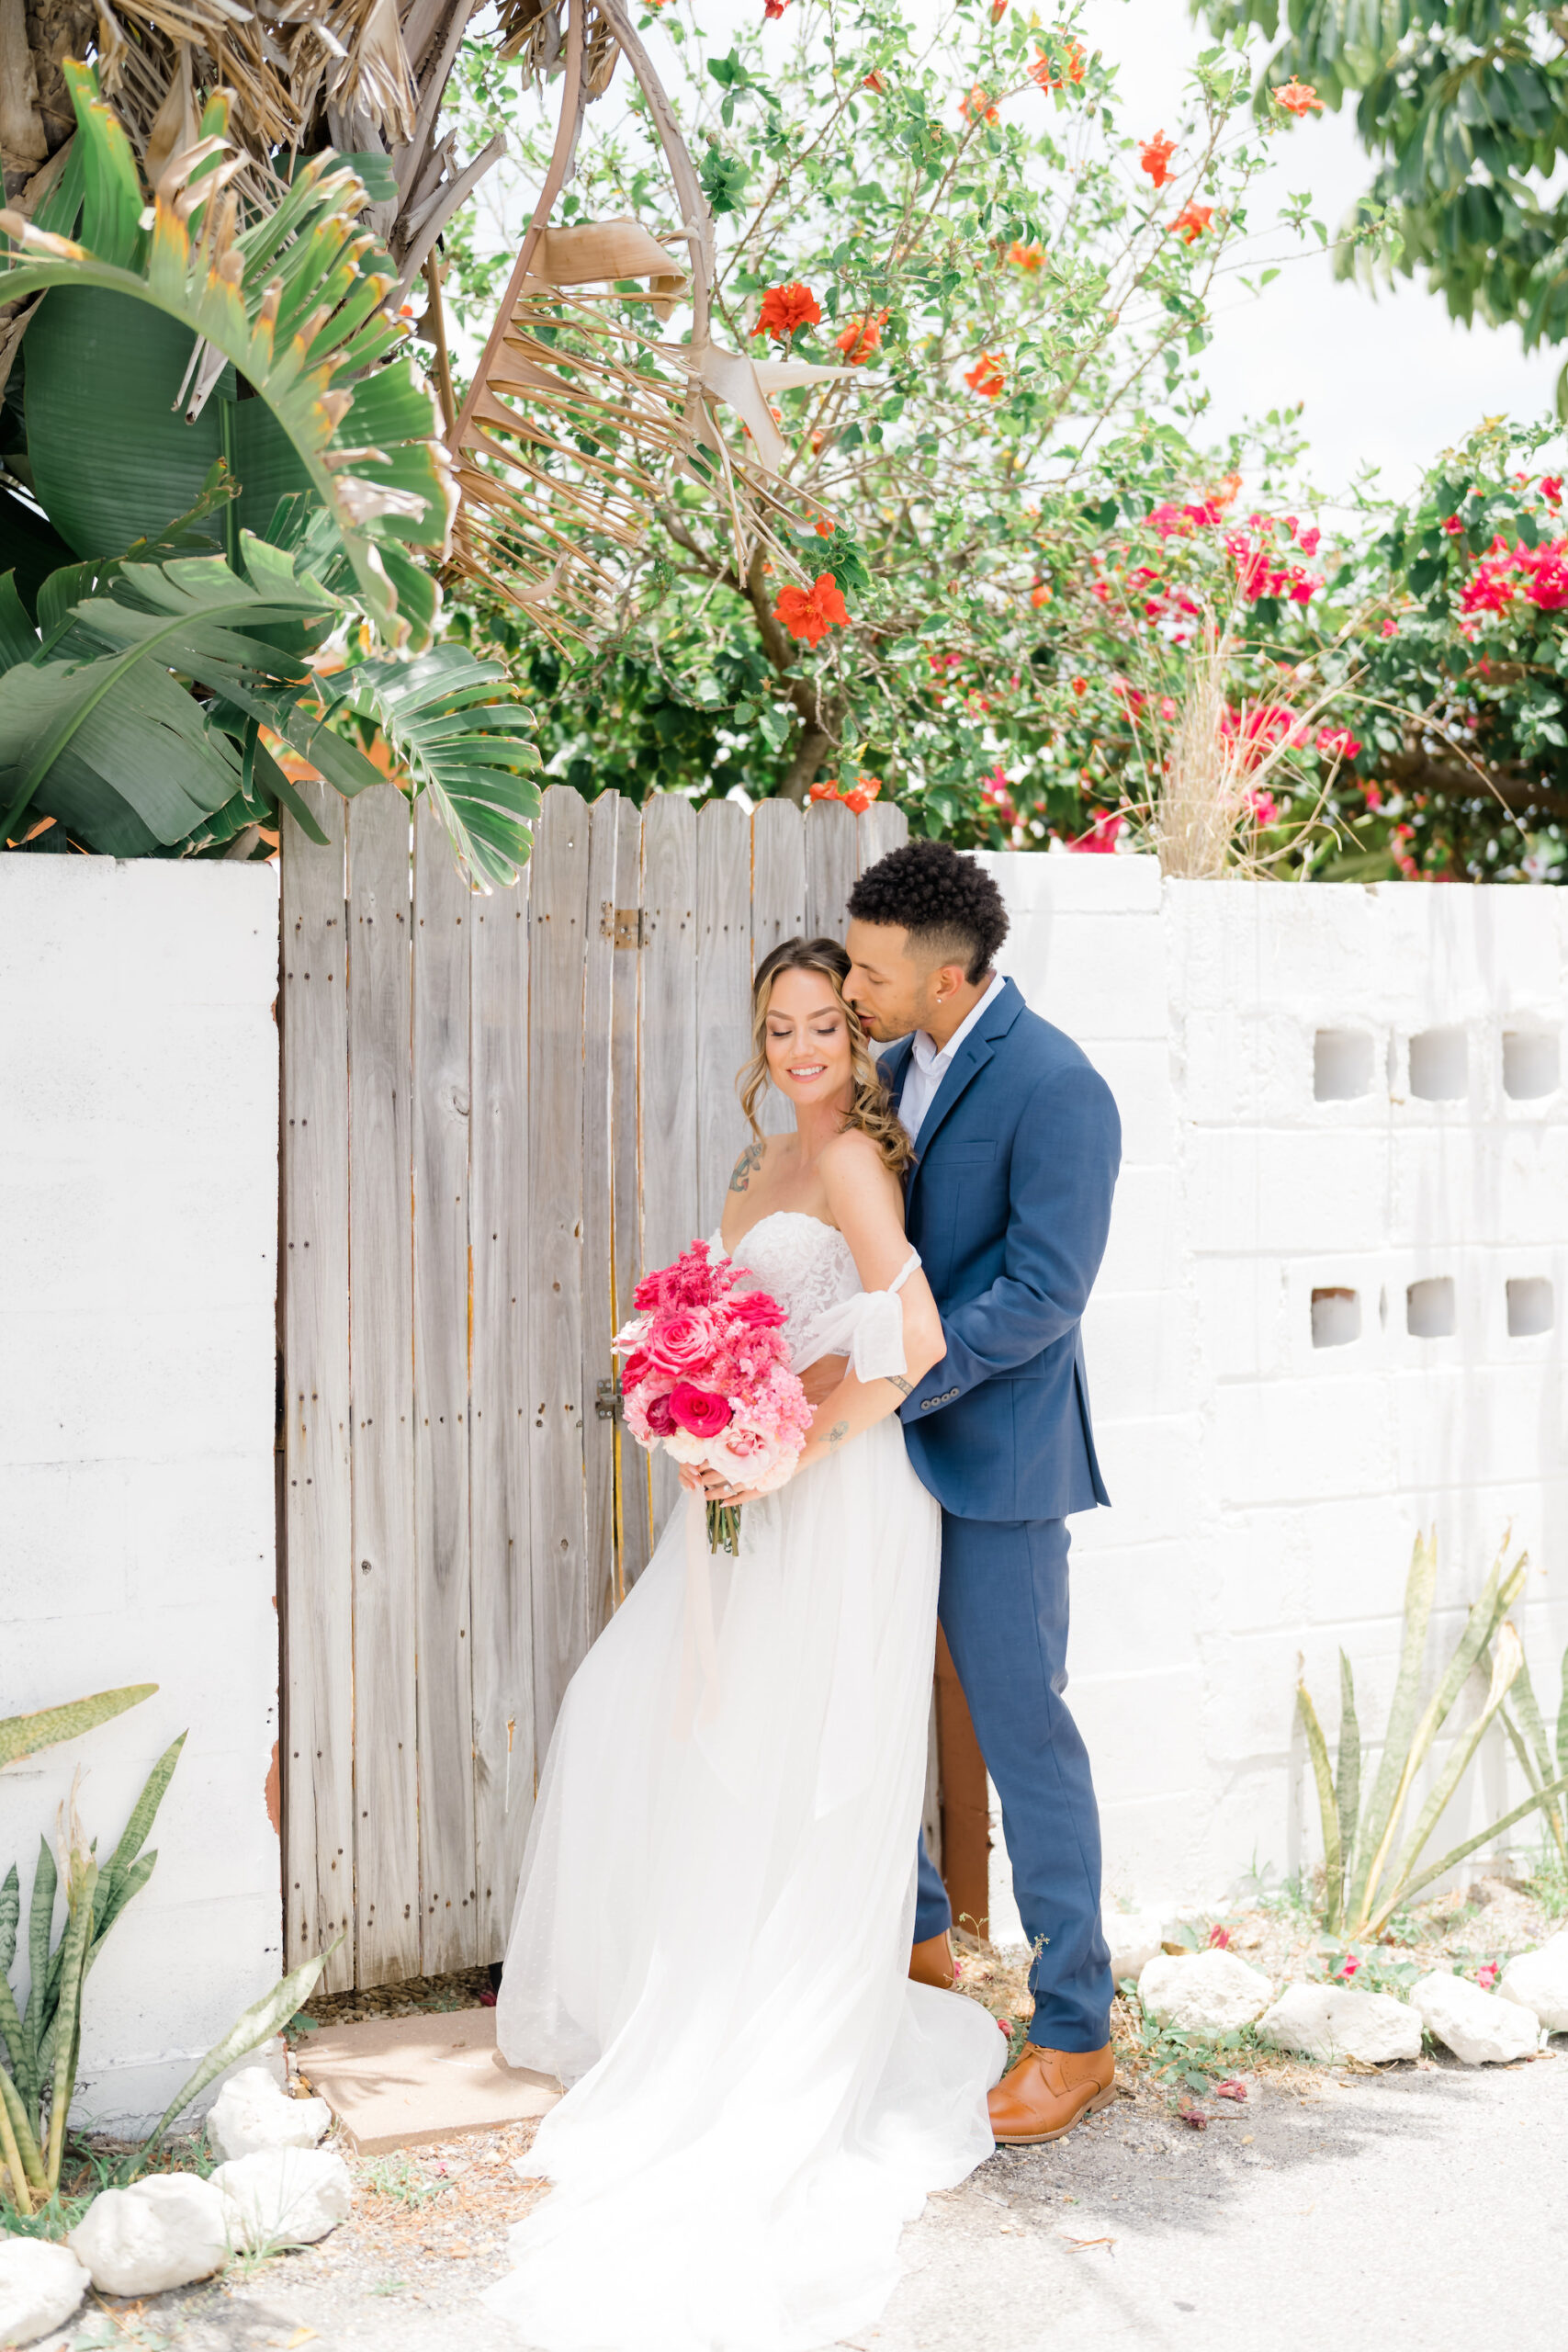 Bride Holding Pink and Fuchsia Floral Bouquet and Groom in Blue Suit Wedding Portrait | St. Pete Beach Wedding Venue The West Events